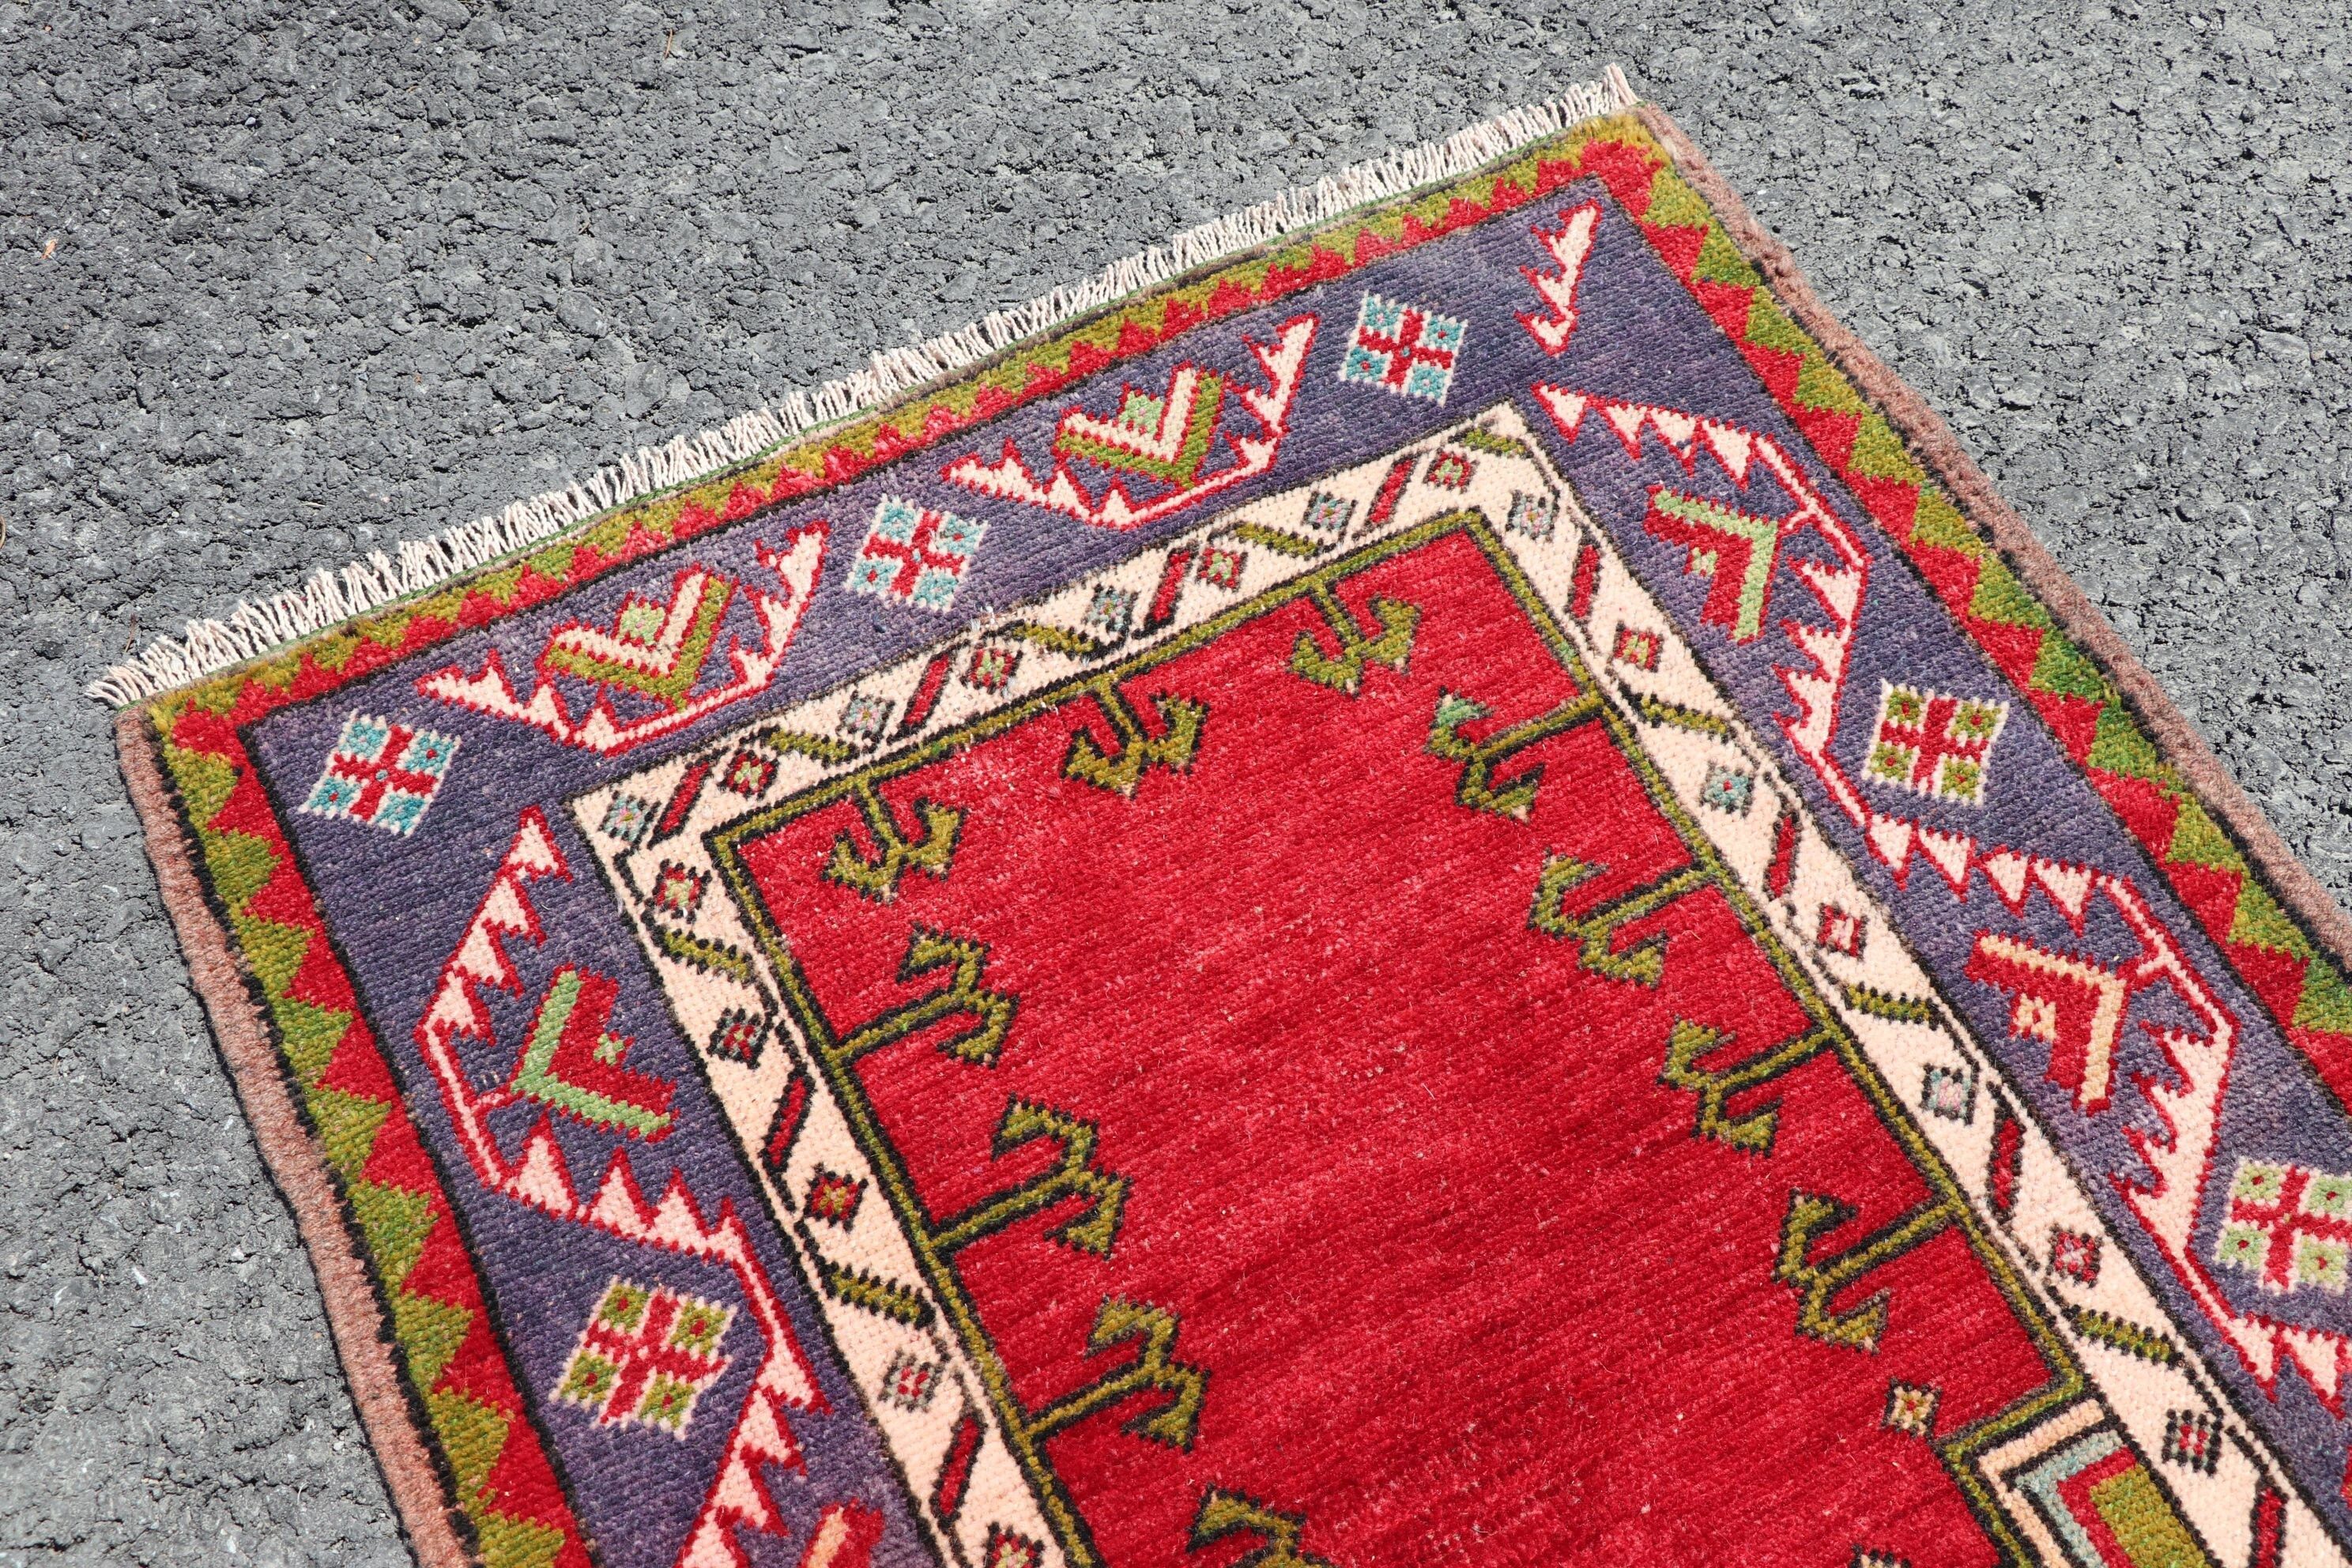 Floor Rugs, Entry Rug, Red Anatolian Rugs, Kitchen Rugs, Vintage Rugs, Cute Rug, Anatolian Rugs, Kilim, 2.3x3.8 ft Small Rugs, Turkish Rugs